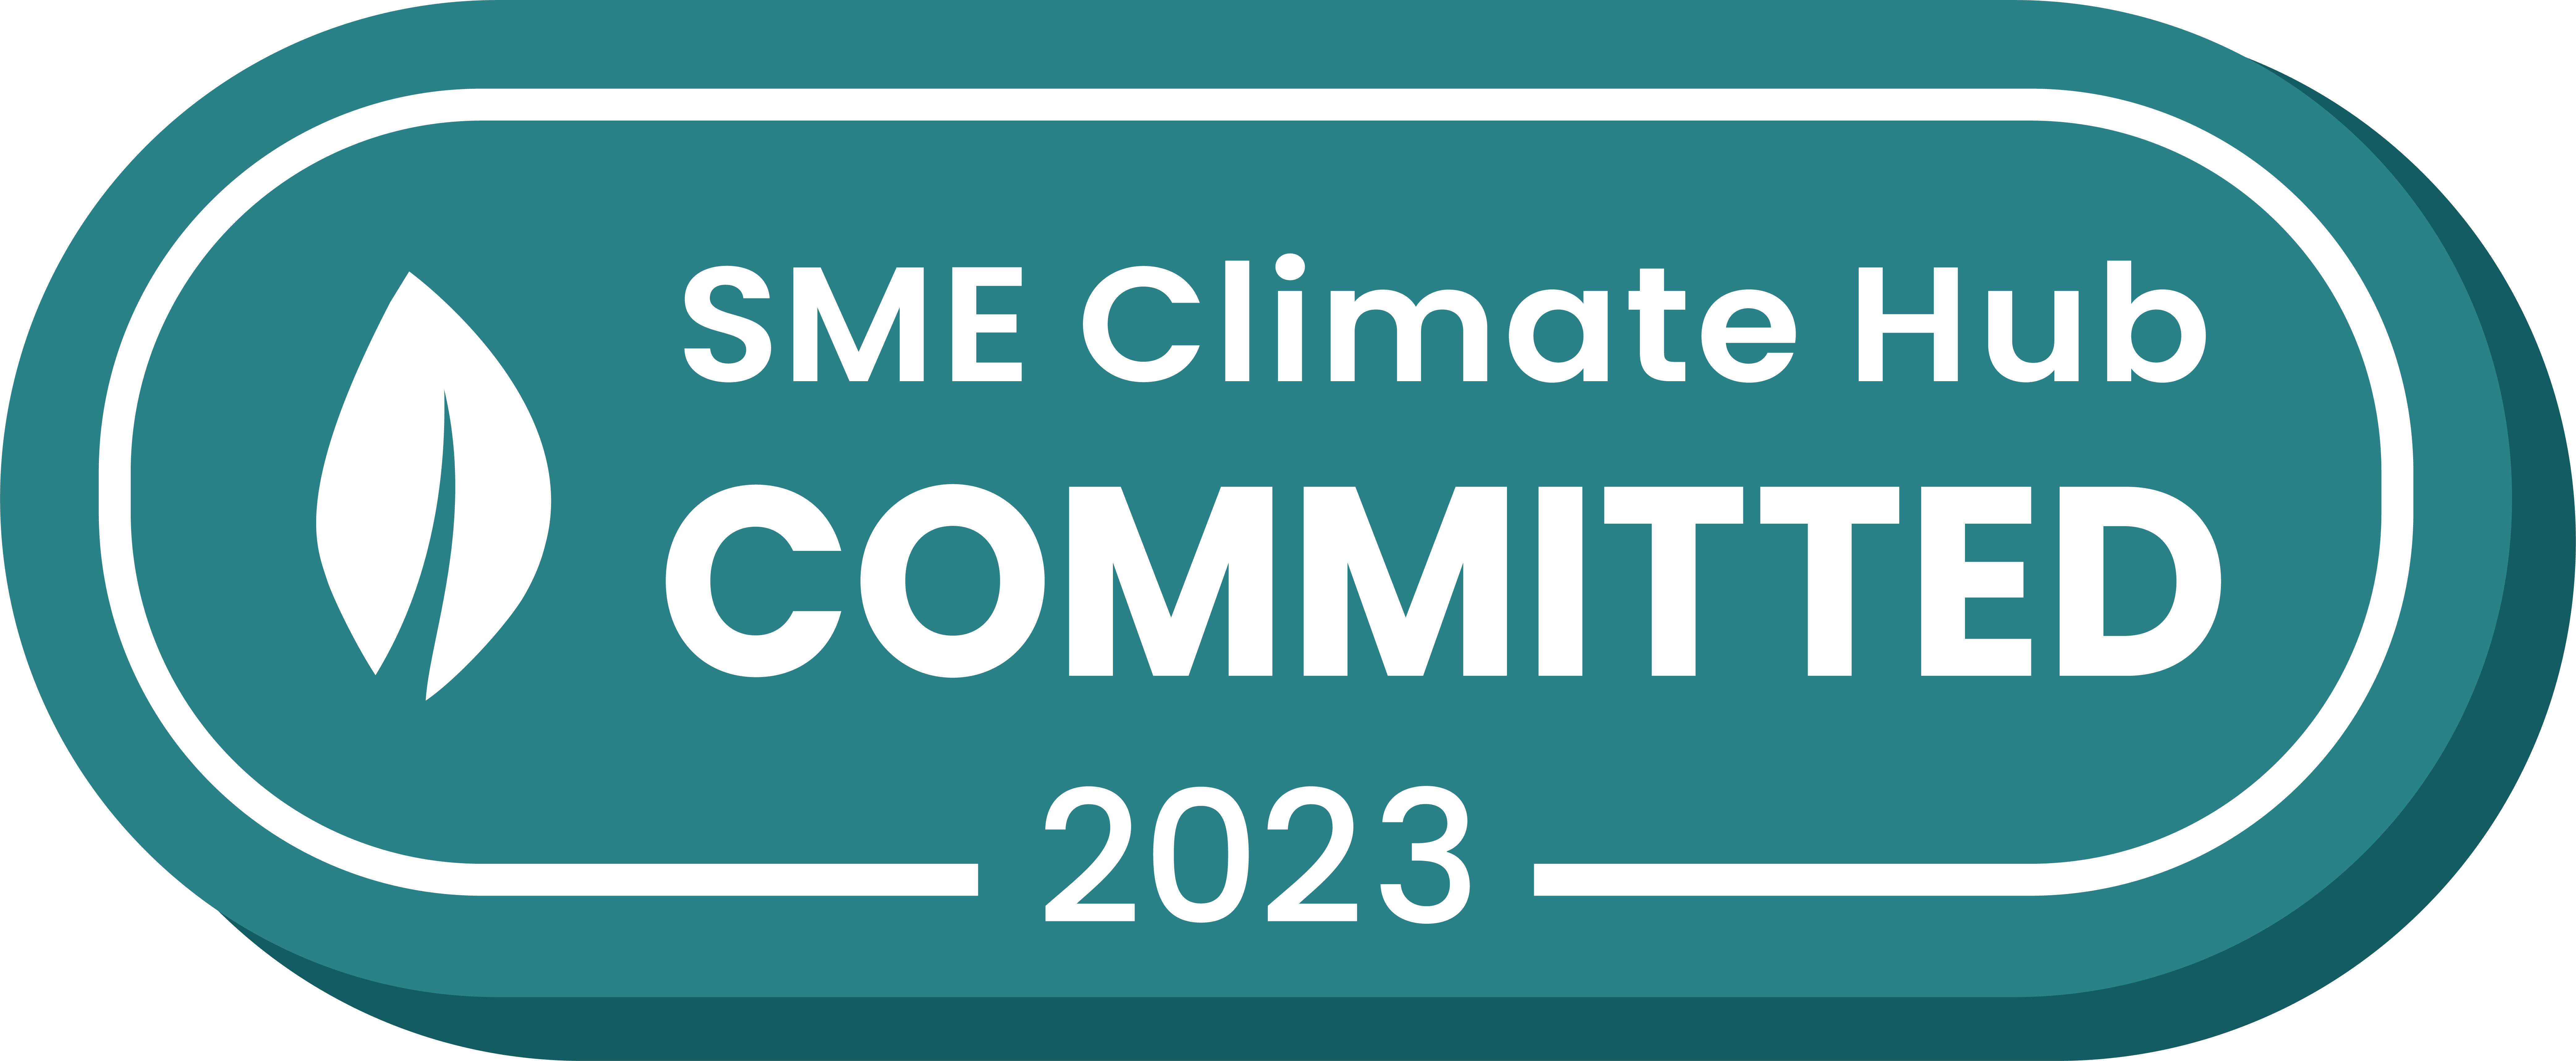 SME Climate Hub Committed